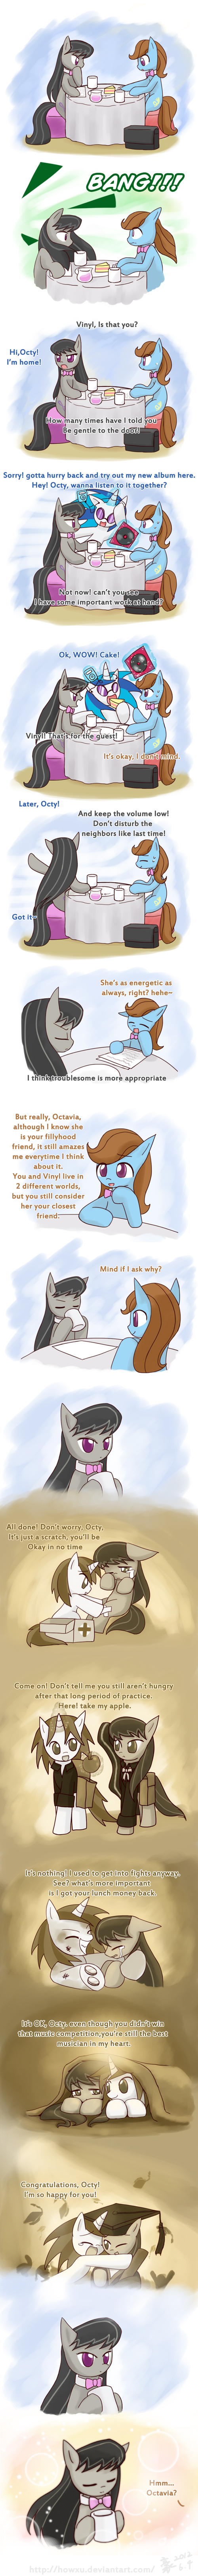 [Obrázek: why_is_she_your_friend__by_howxu-d52cuve.jpg]